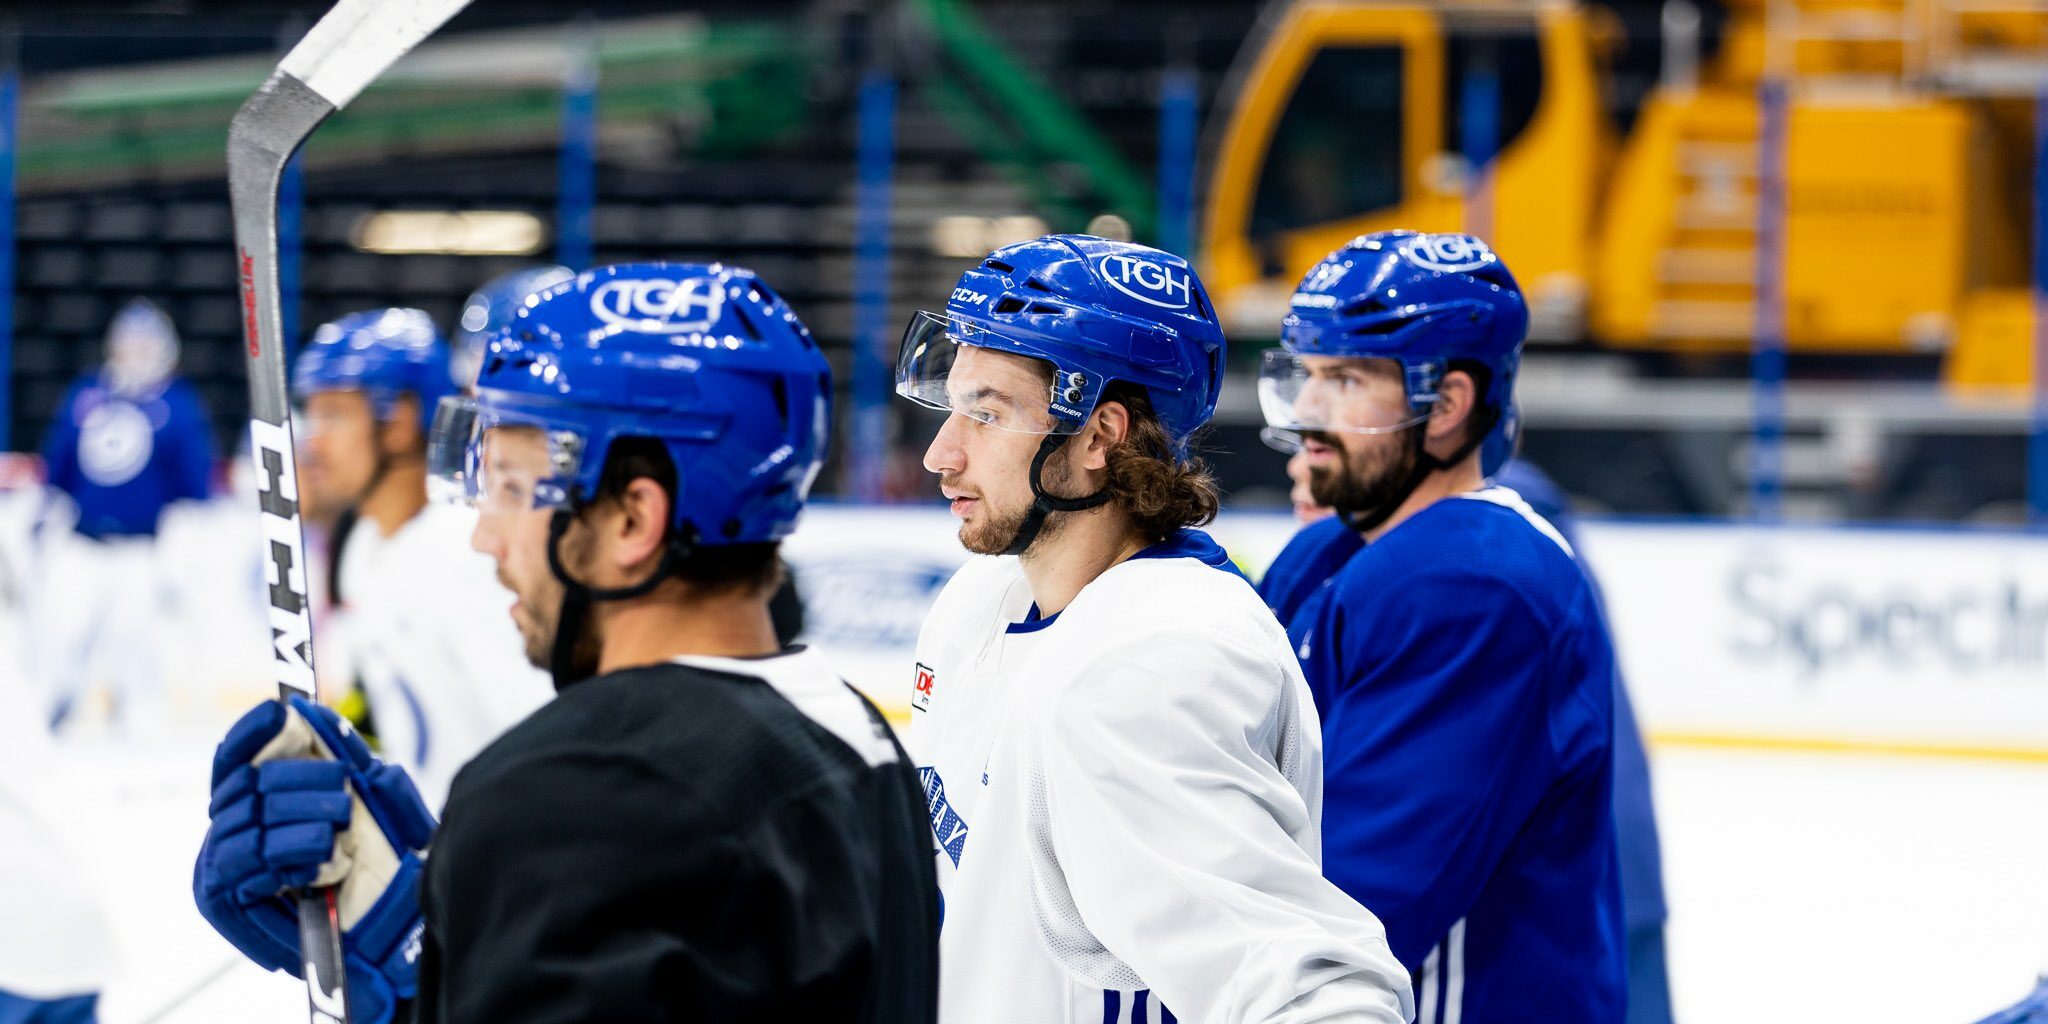 Cirelli and other lightning players at practice